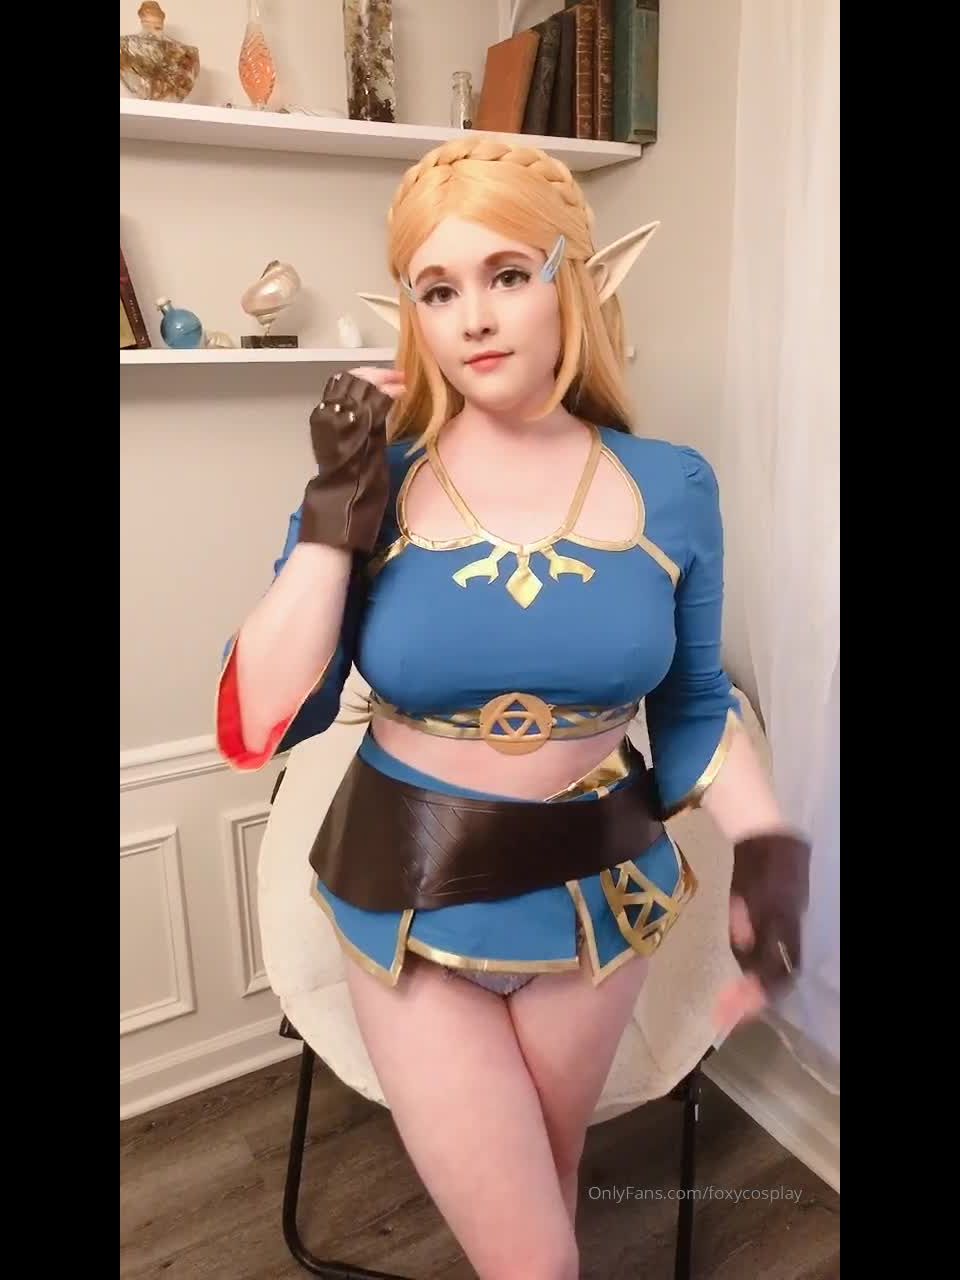 Foxycosplay () - heres a little zelda video clip for you all from last night i have another to share late 12-02-2020